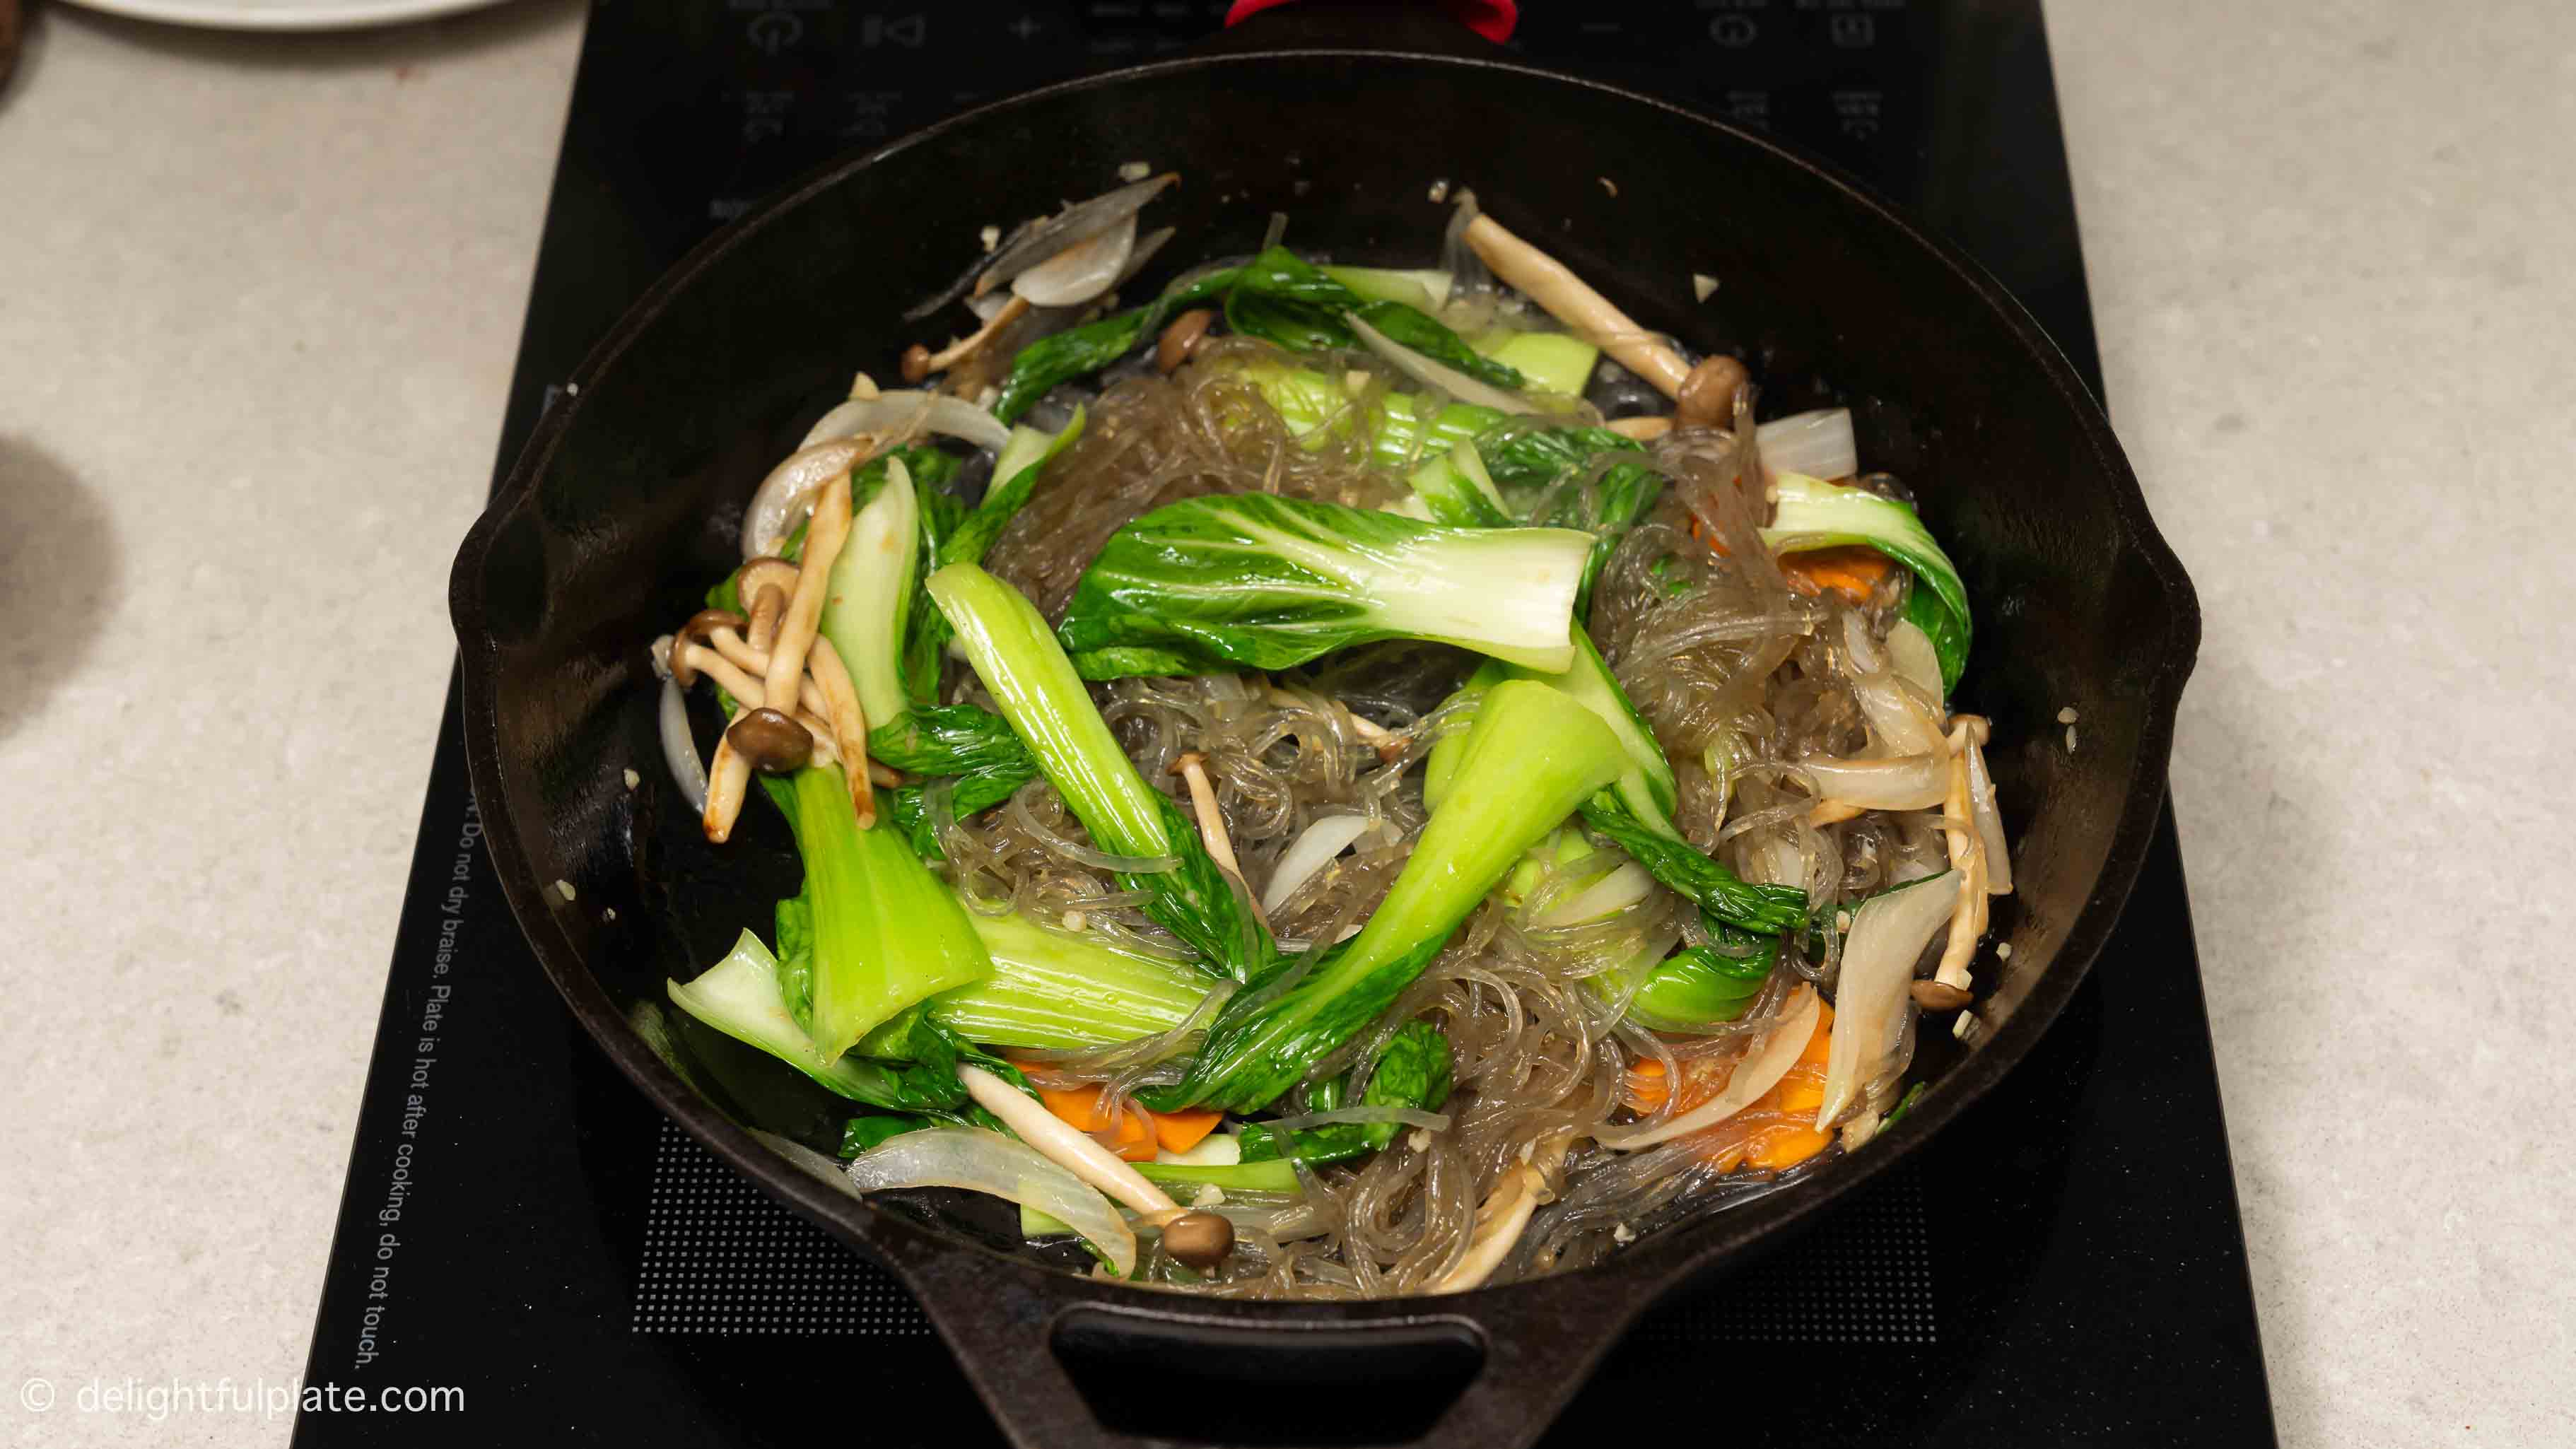 Stir-fry glass noodles with the vegetables in the skillet.